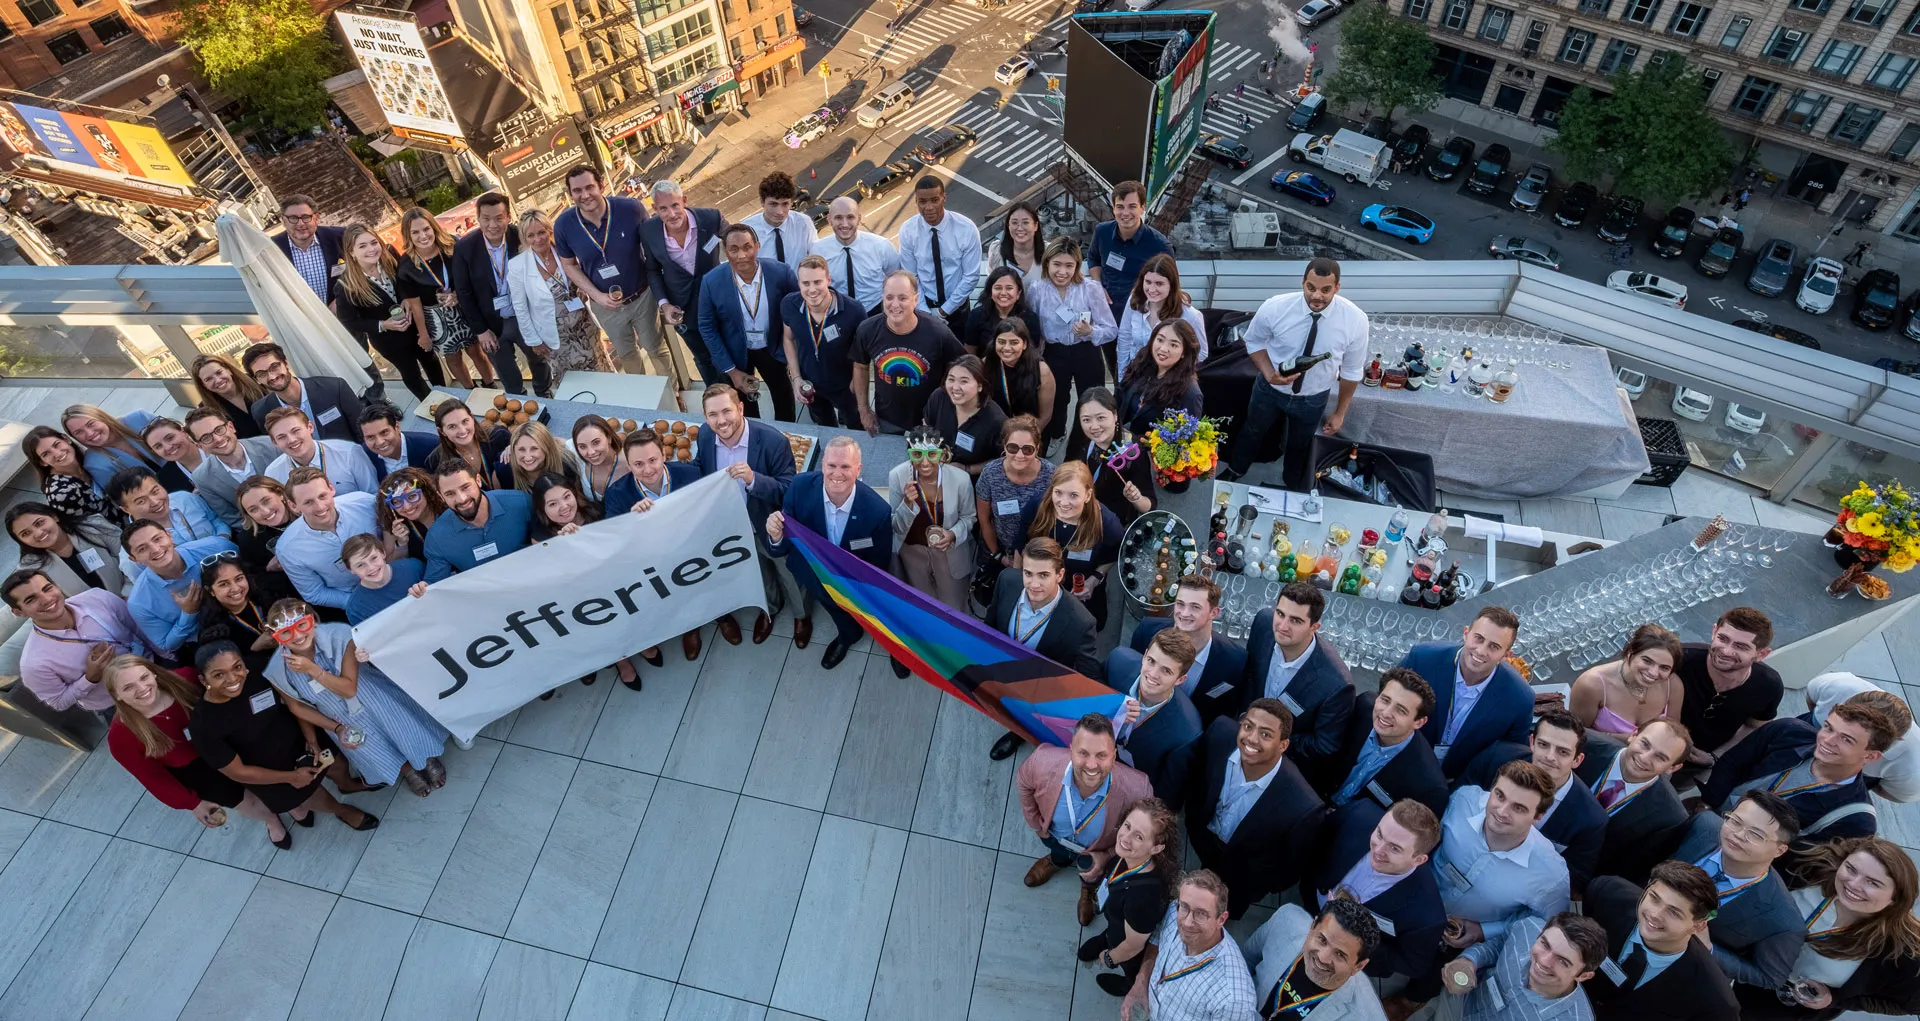 Pride event group photo on rooftop with Jefferies logo banner